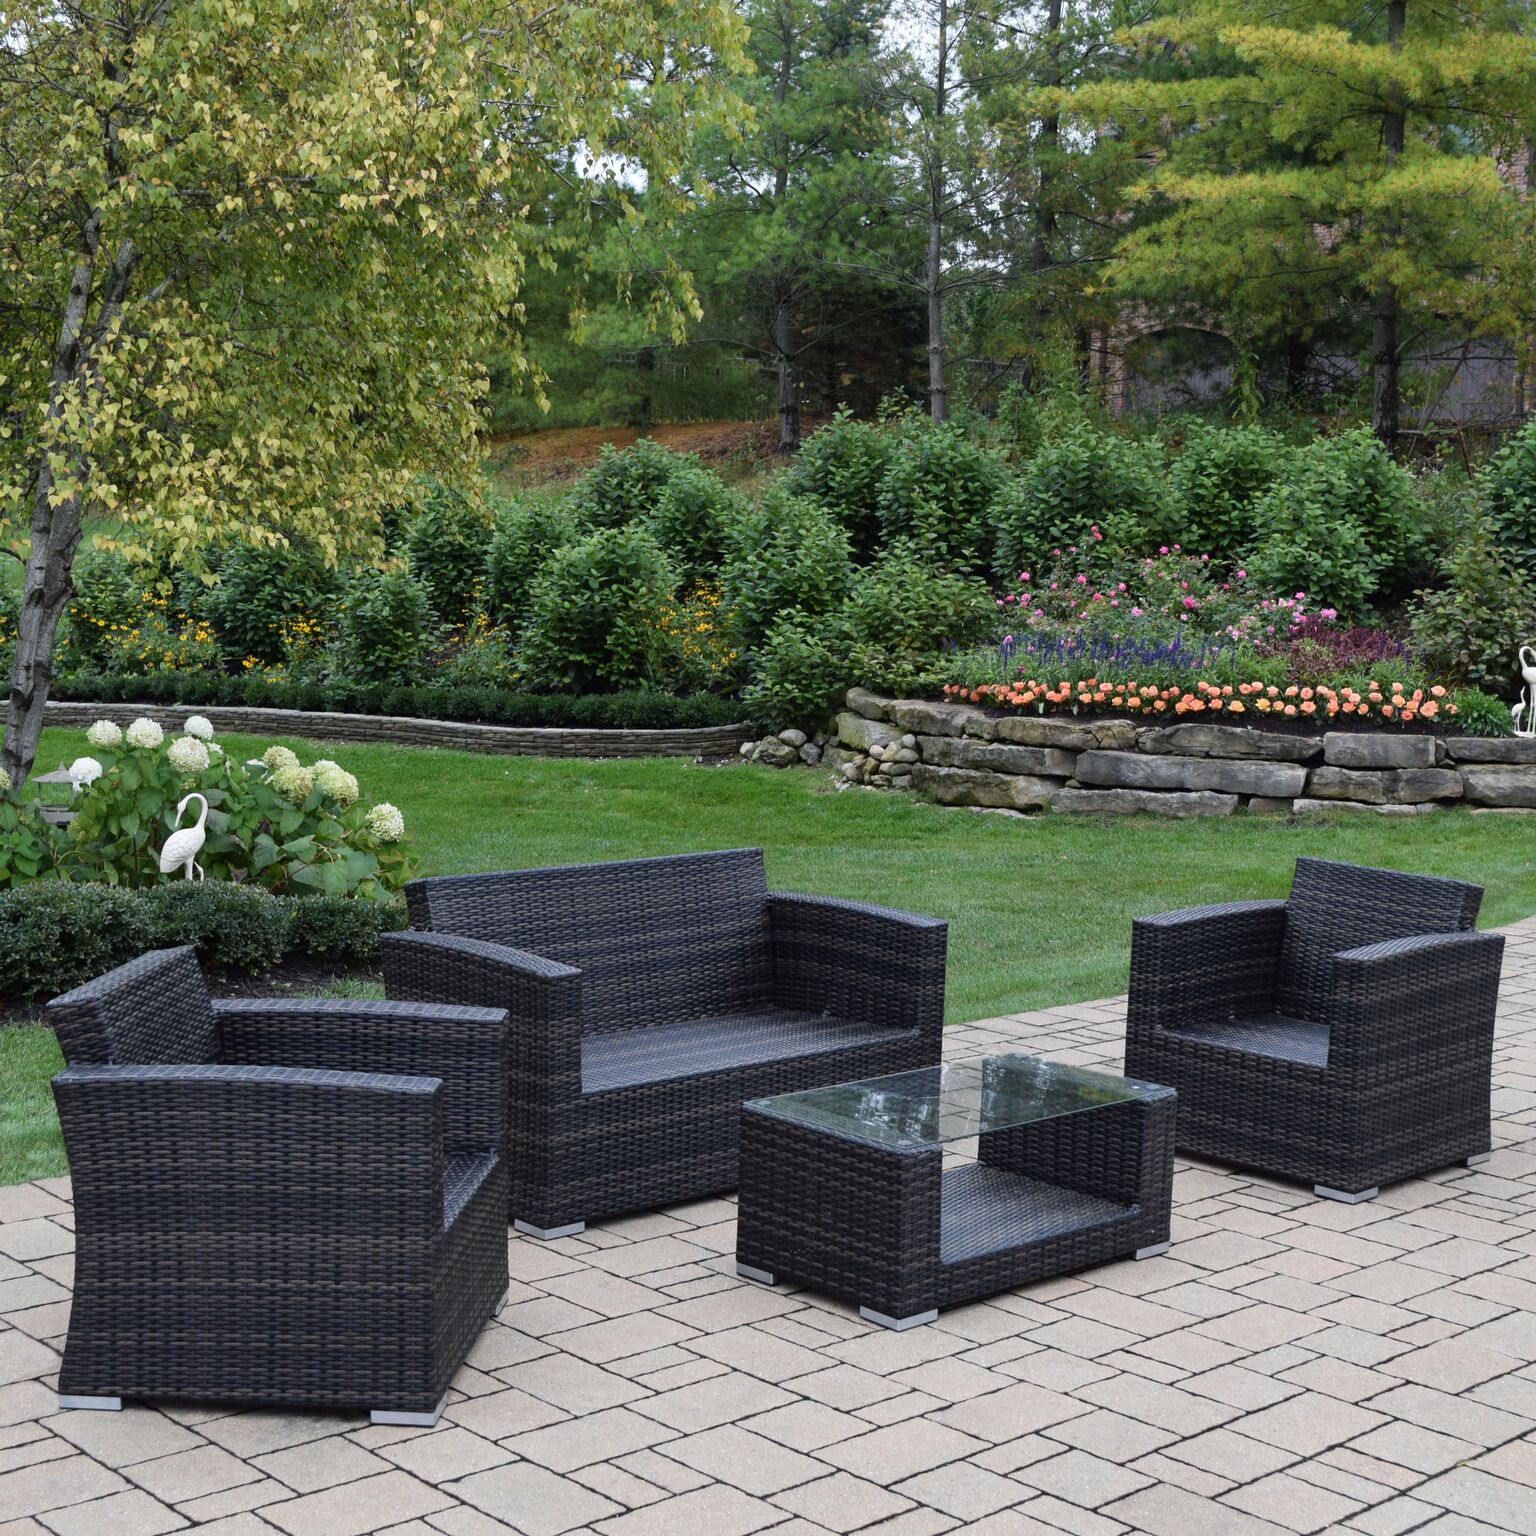 Outdoor Living and Style 4-Piece Black Resin Wicker Chat Set - Gray Cushions - image 2 of 3